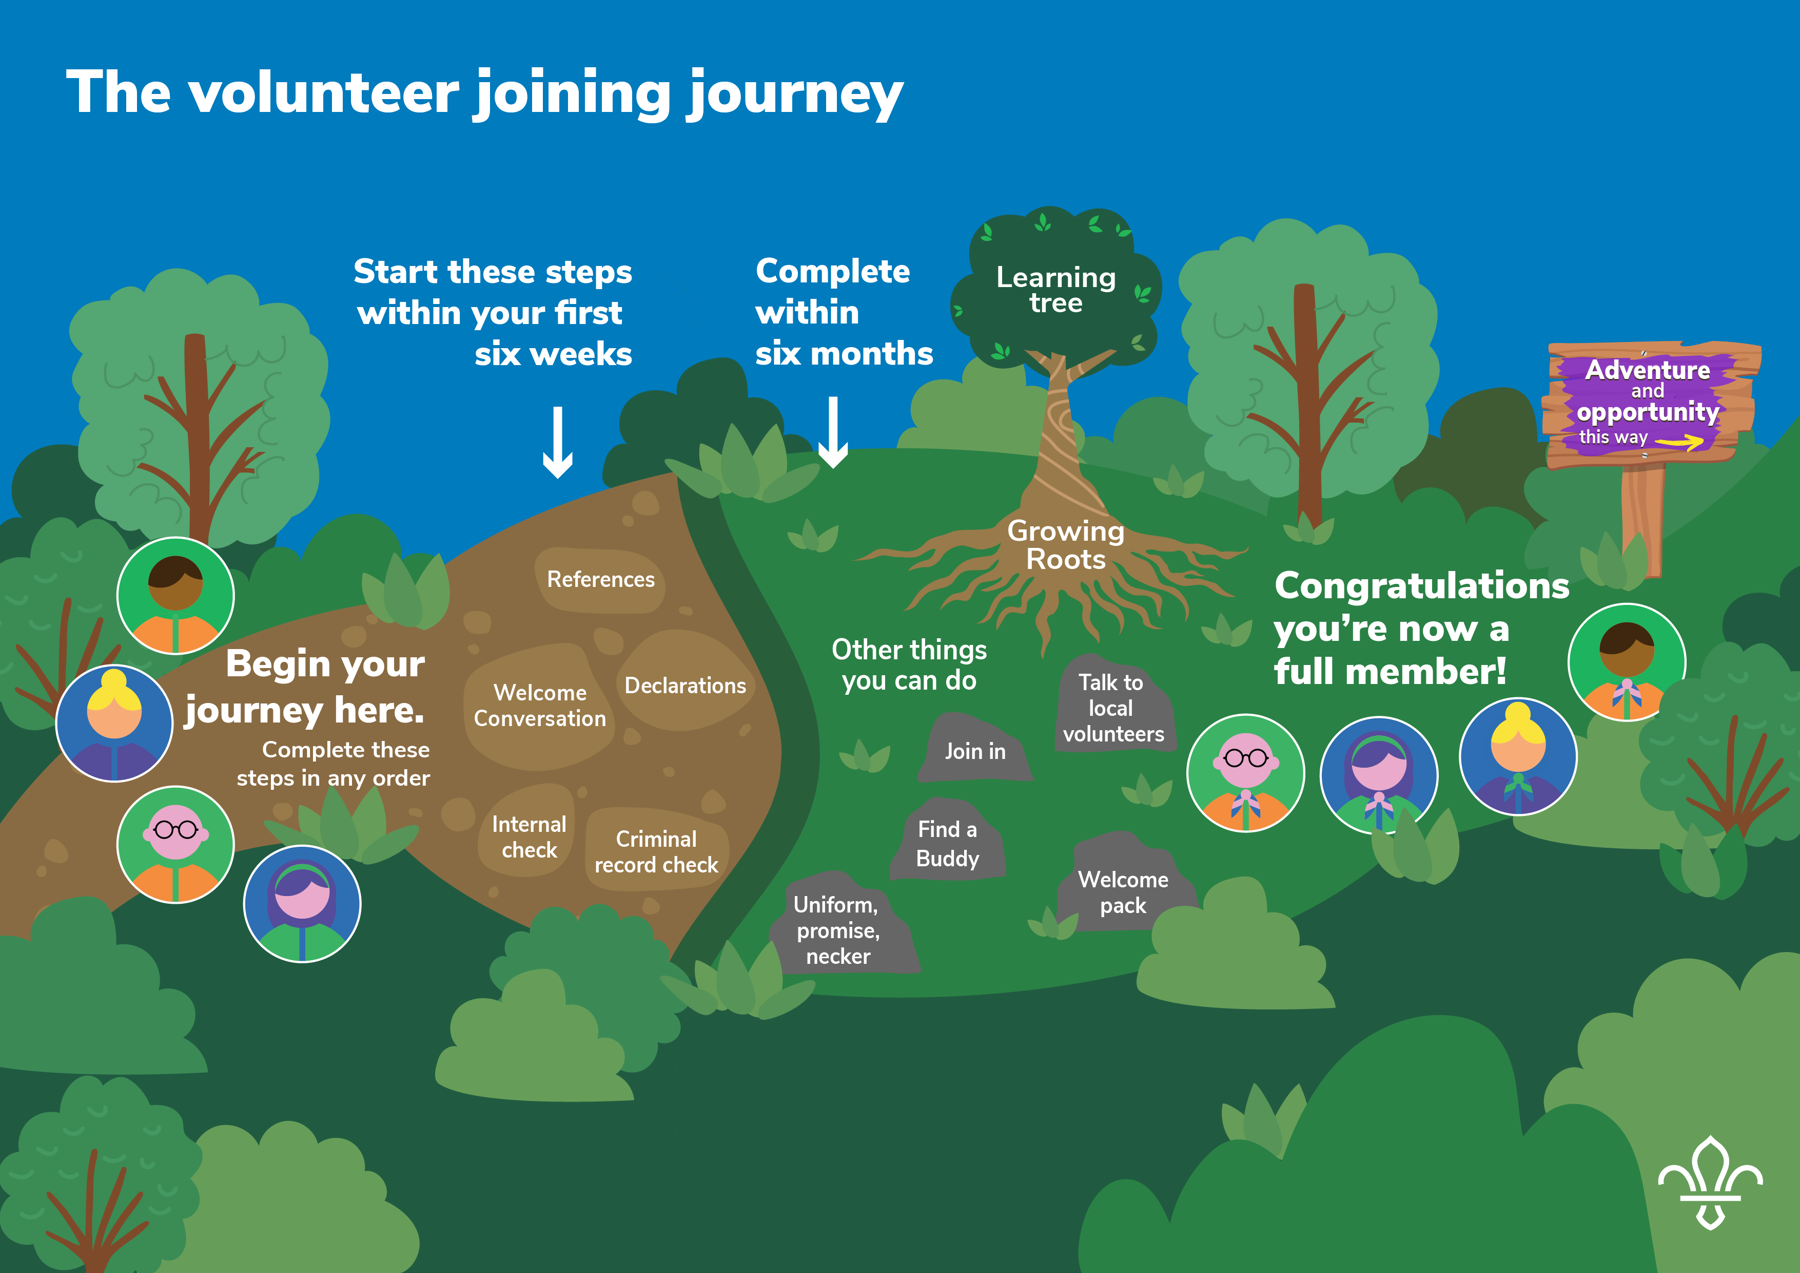 Graphic showing the steps of the volunteer joining journey.